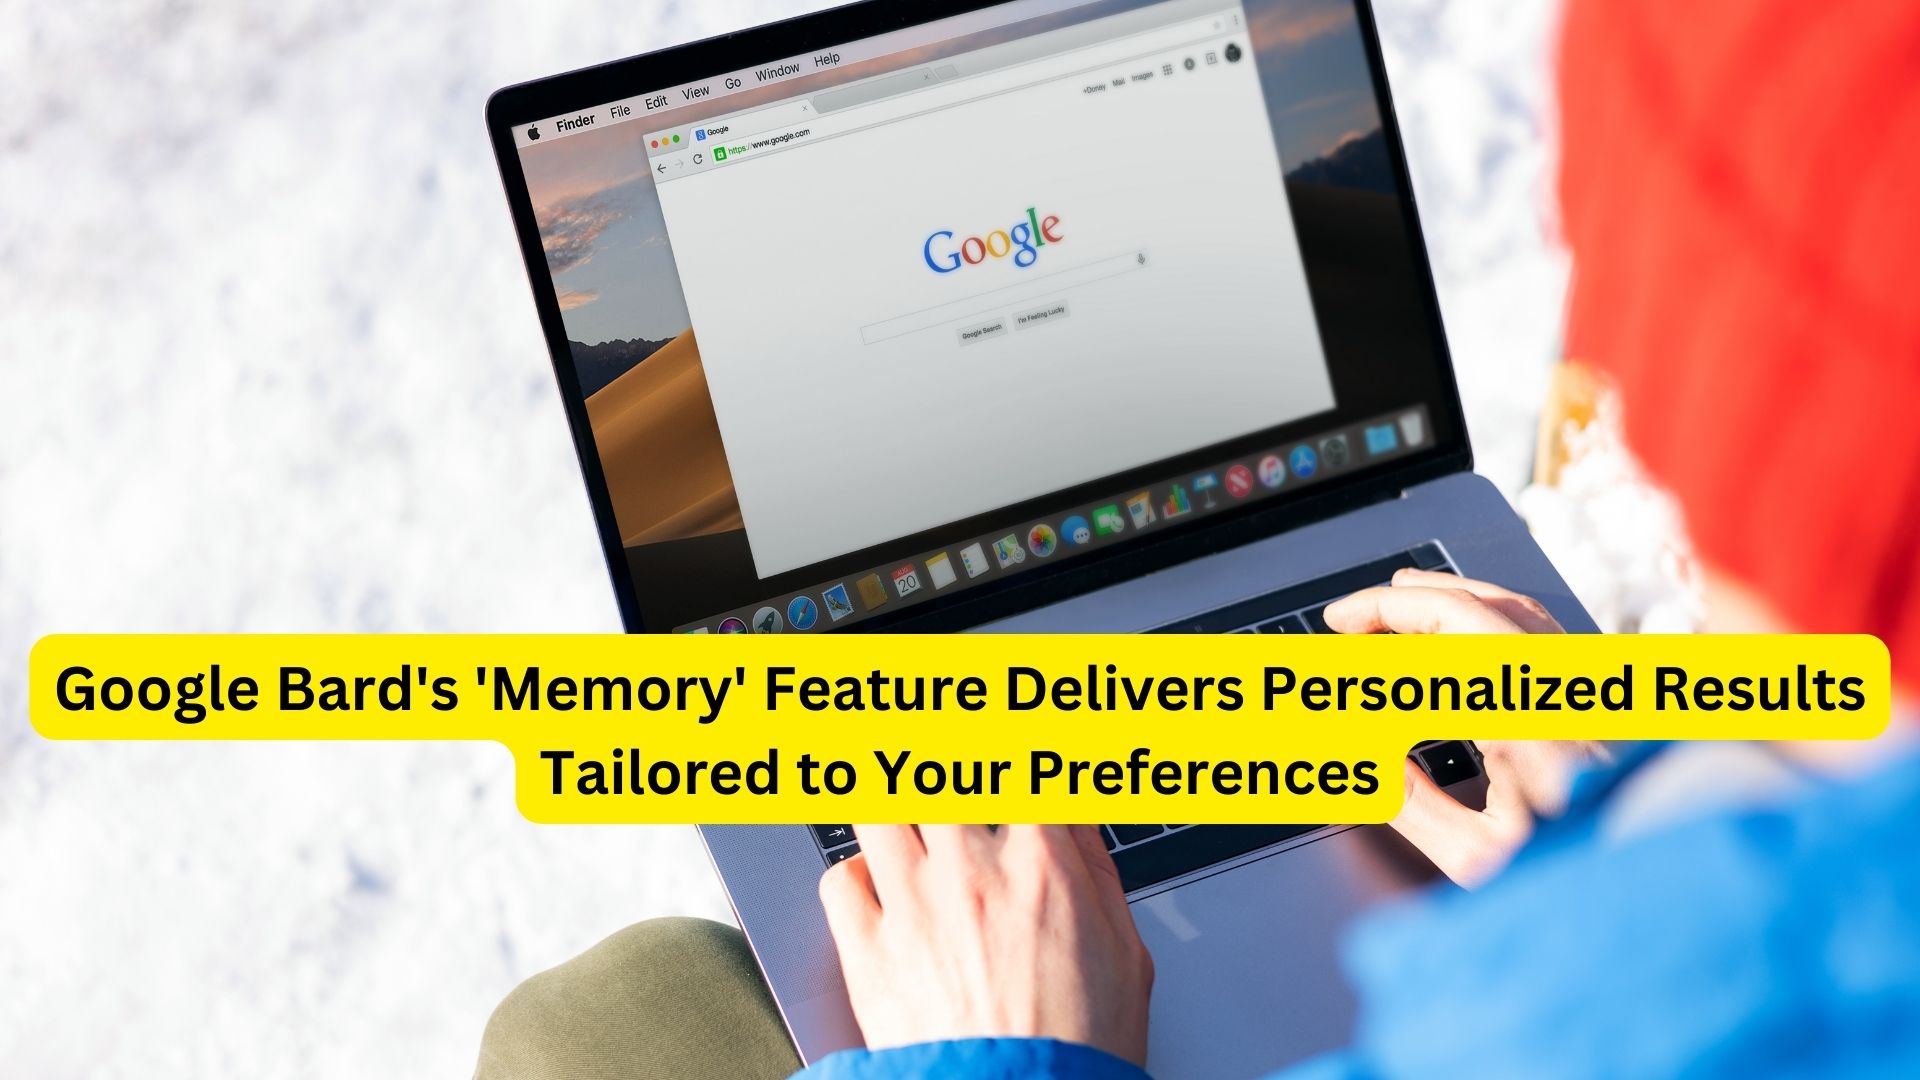 Google Bard's 'Memory' Feature Delivers Personalized Results Tailored to Your Preferences